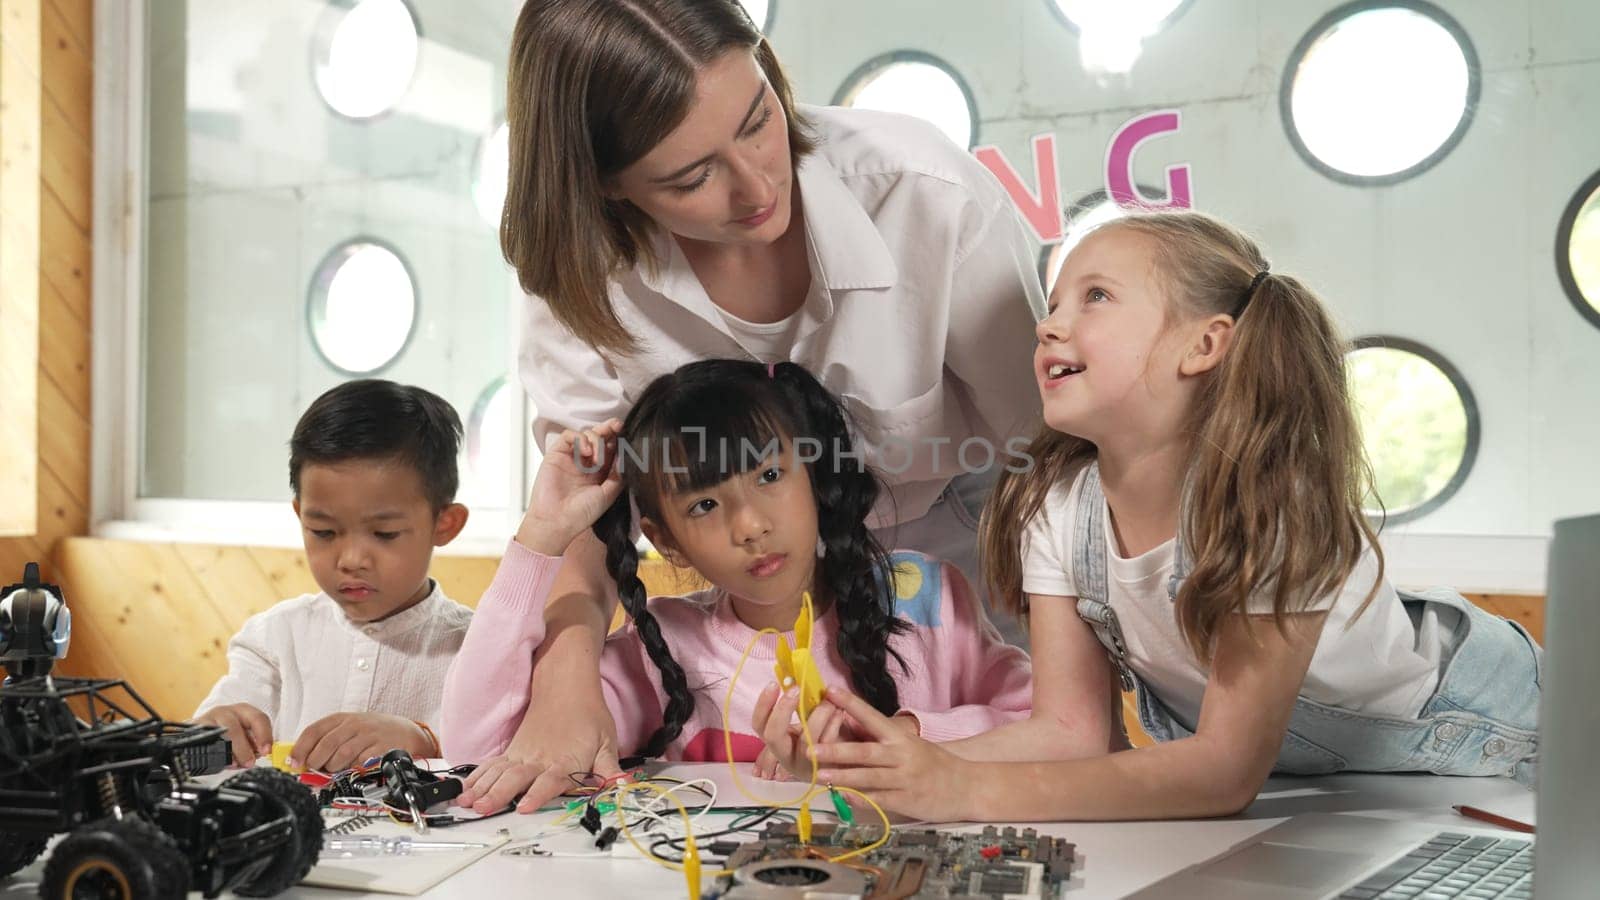 Teacher looking at children while diverse student looking at screen. Children excited in presentation while drawing or writing art books at table with toys and color pencil placed on table. Erudition.